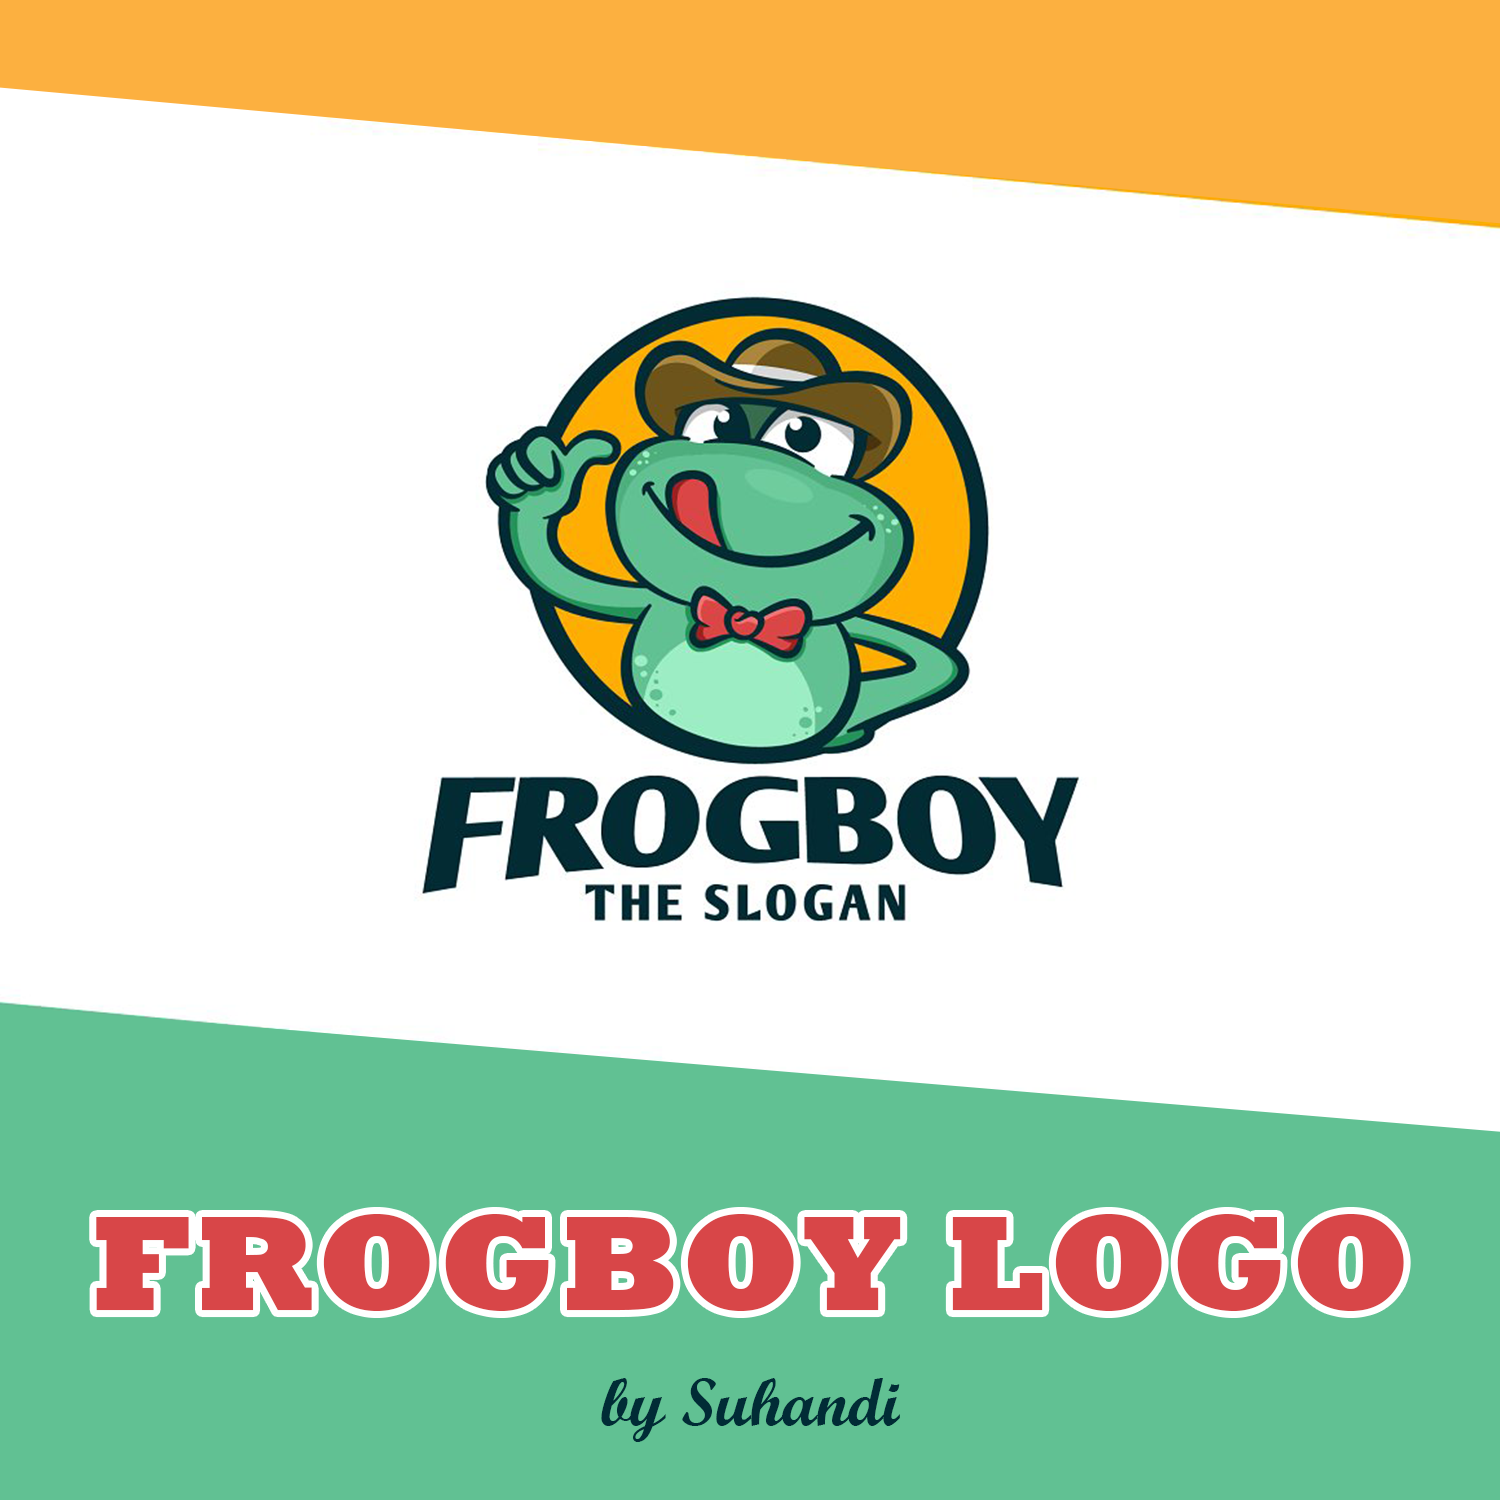 Frogboy Logo cover.